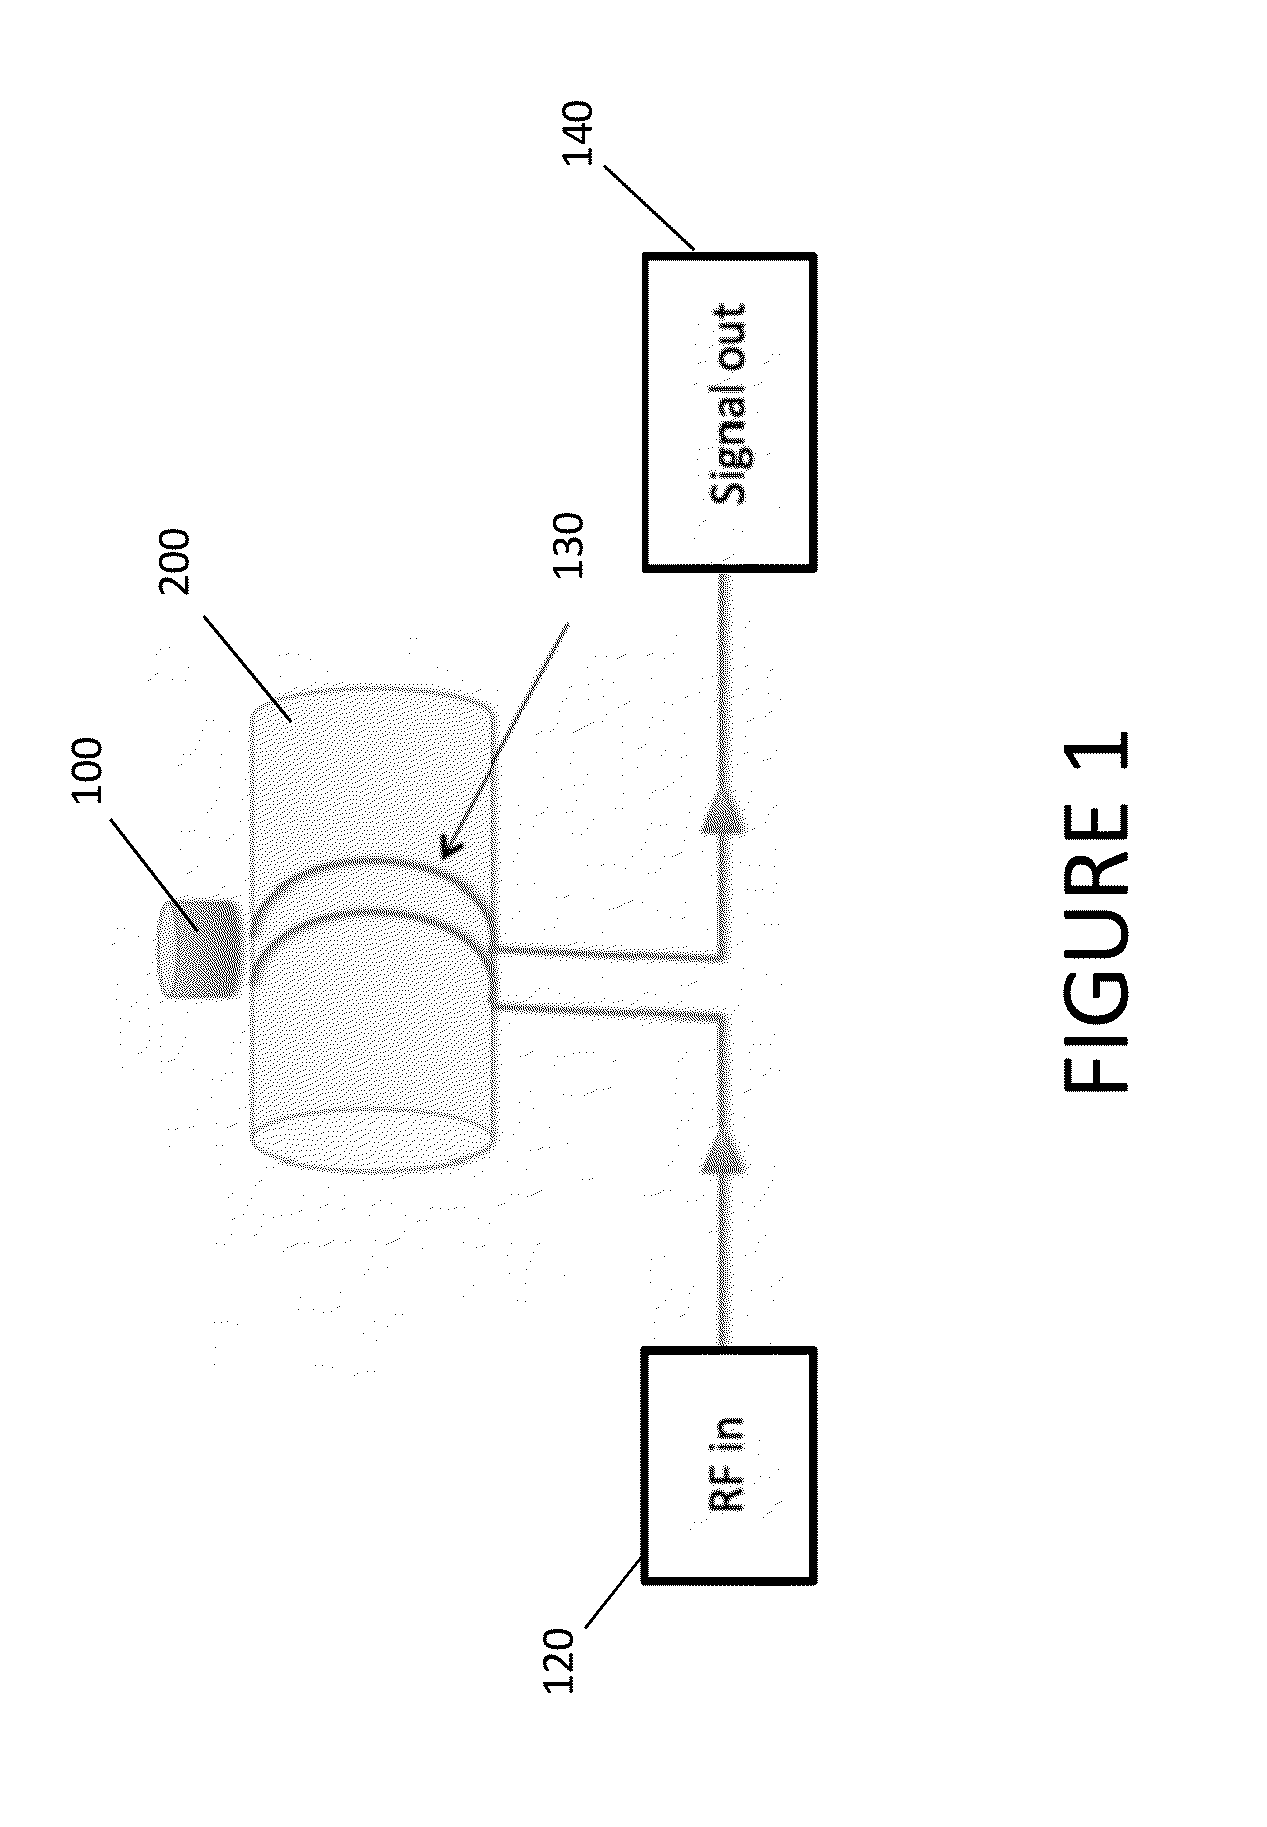 Portable system and method for MRI imaging and tissue analysis